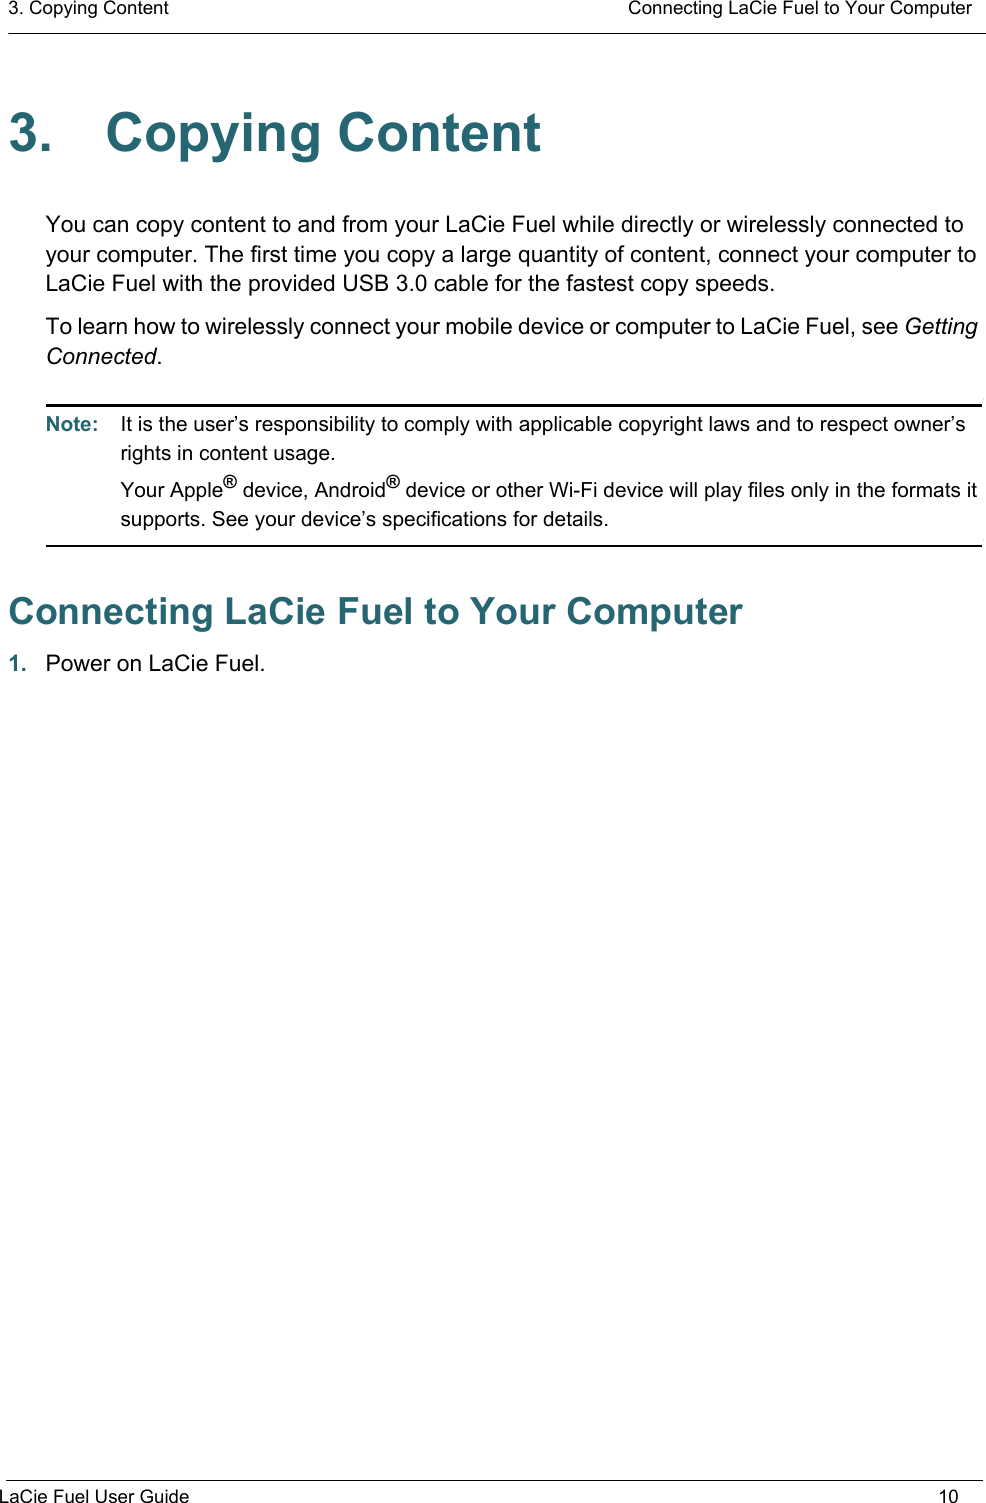 3. Copying Content  Connecting LaCie Fuel to Your ComputerLaCie Fuel User Guide 103. Copying ContentYou can copy content to and from your LaCie Fuel while directly or wirelessly connected to your computer. The first time you copy a large quantity of content, connect your computer to LaCie Fuel with the provided USB 3.0 cable for the fastest copy speeds. To learn how to wirelessly connect your mobile device or computer to LaCie Fuel, see Getting Connected.Note:  It is the user’s responsibility to comply with applicable copyright laws and to respect owner’s rights in content usage. Your Apple® device, Android® device or other Wi-Fi device will play files only in the formats it supports. See your device’s specifications for details.Connecting LaCie Fuel to Your Computer1. Power on LaCie Fuel.